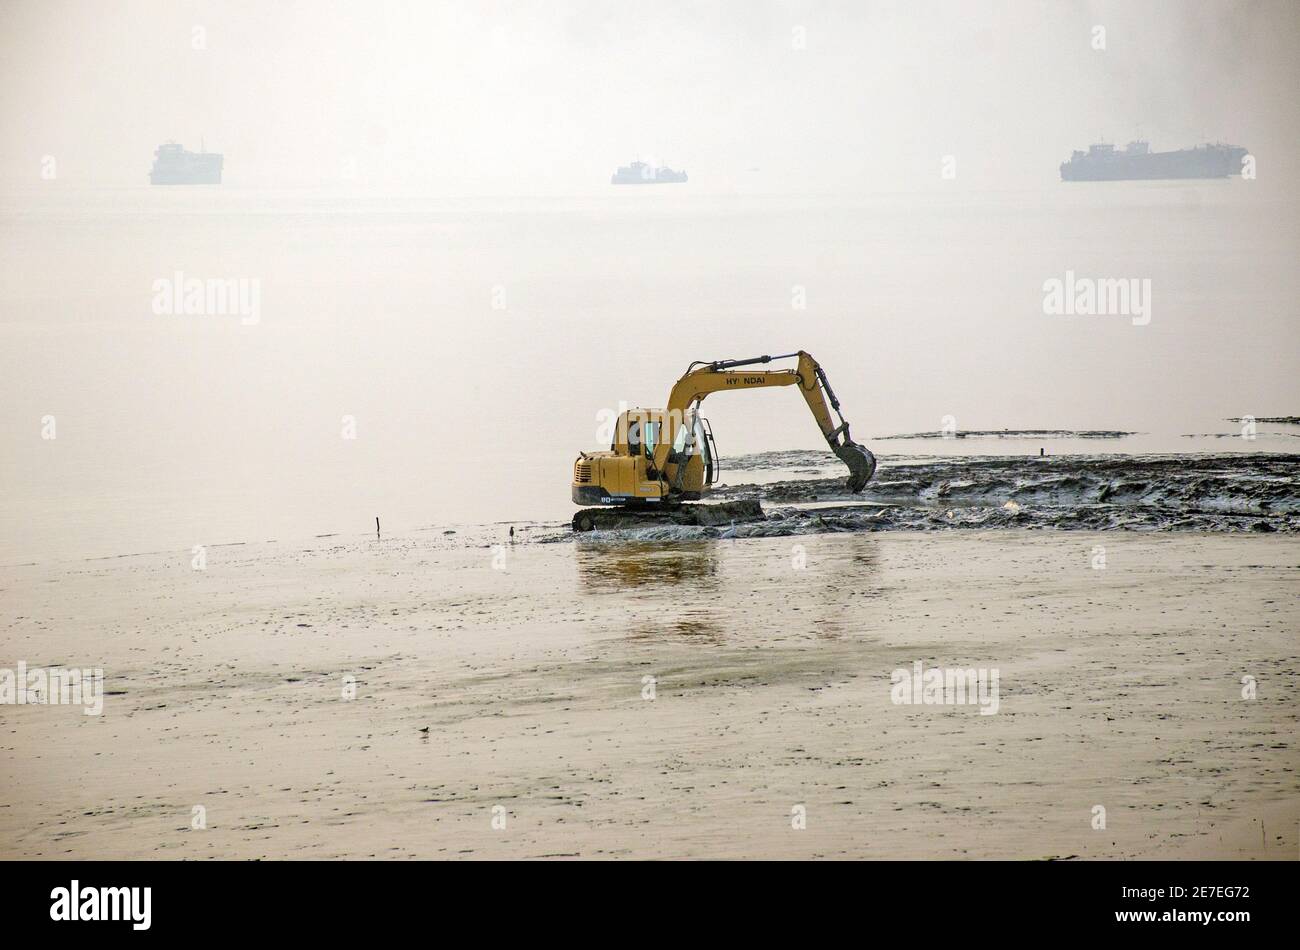 diamond harbour west bengal india on 13th december 2020:Diamond Harbor's Ganges River is being dredged to increase river navigability during low tide. Stock Photo